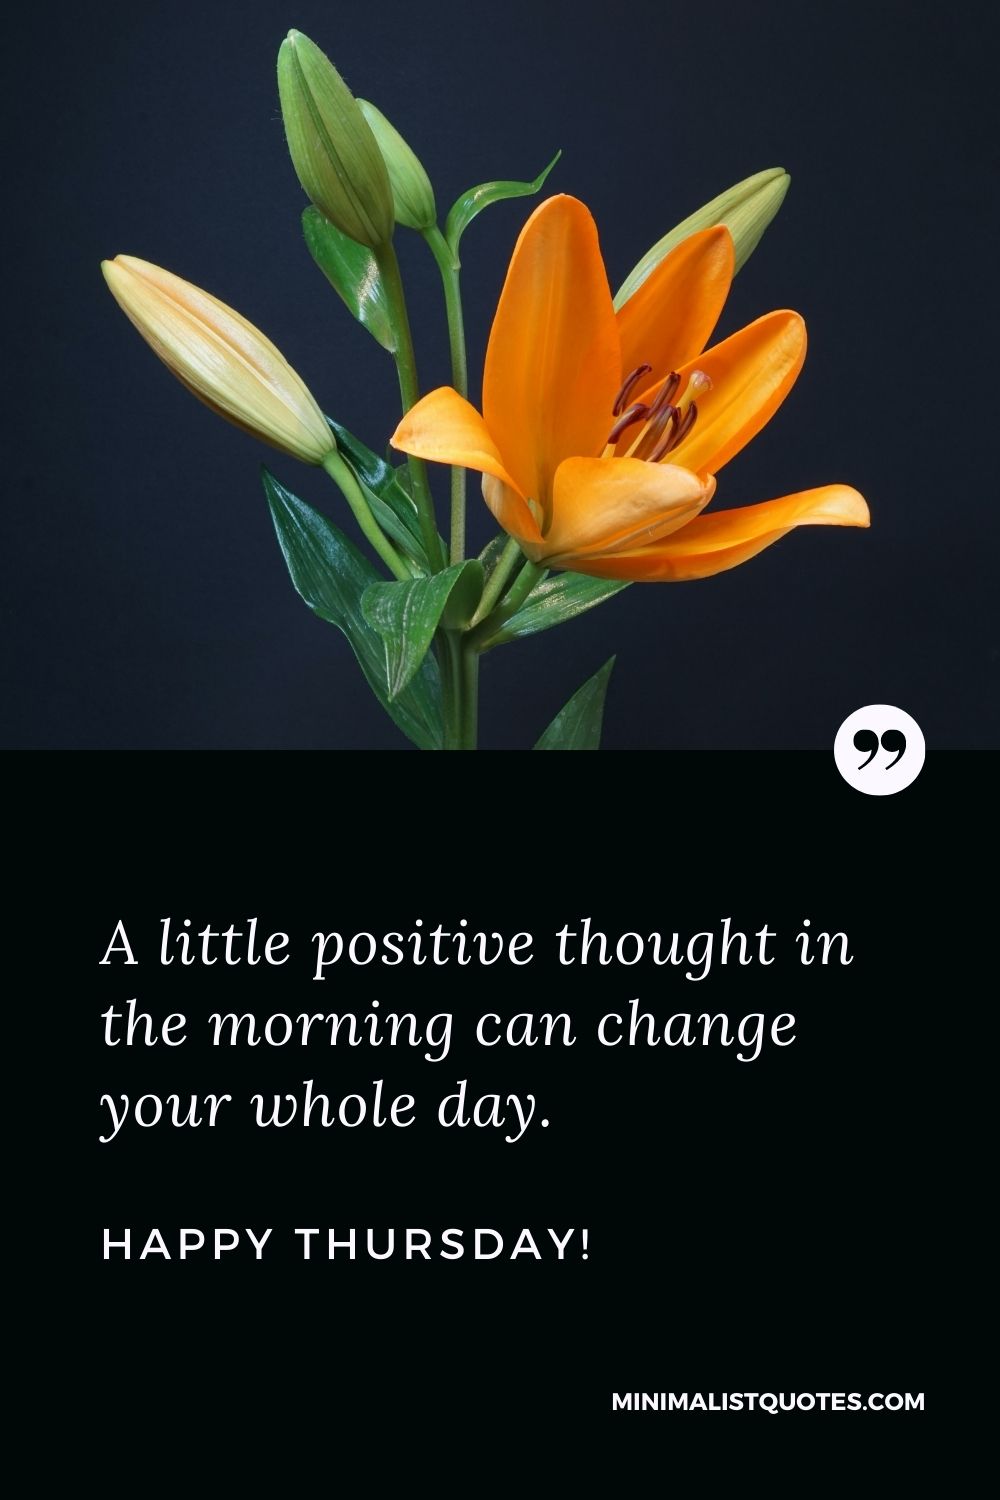 Thursday positive quotes: A little positive thought in the morning can change your whole day. Happy Thursday!